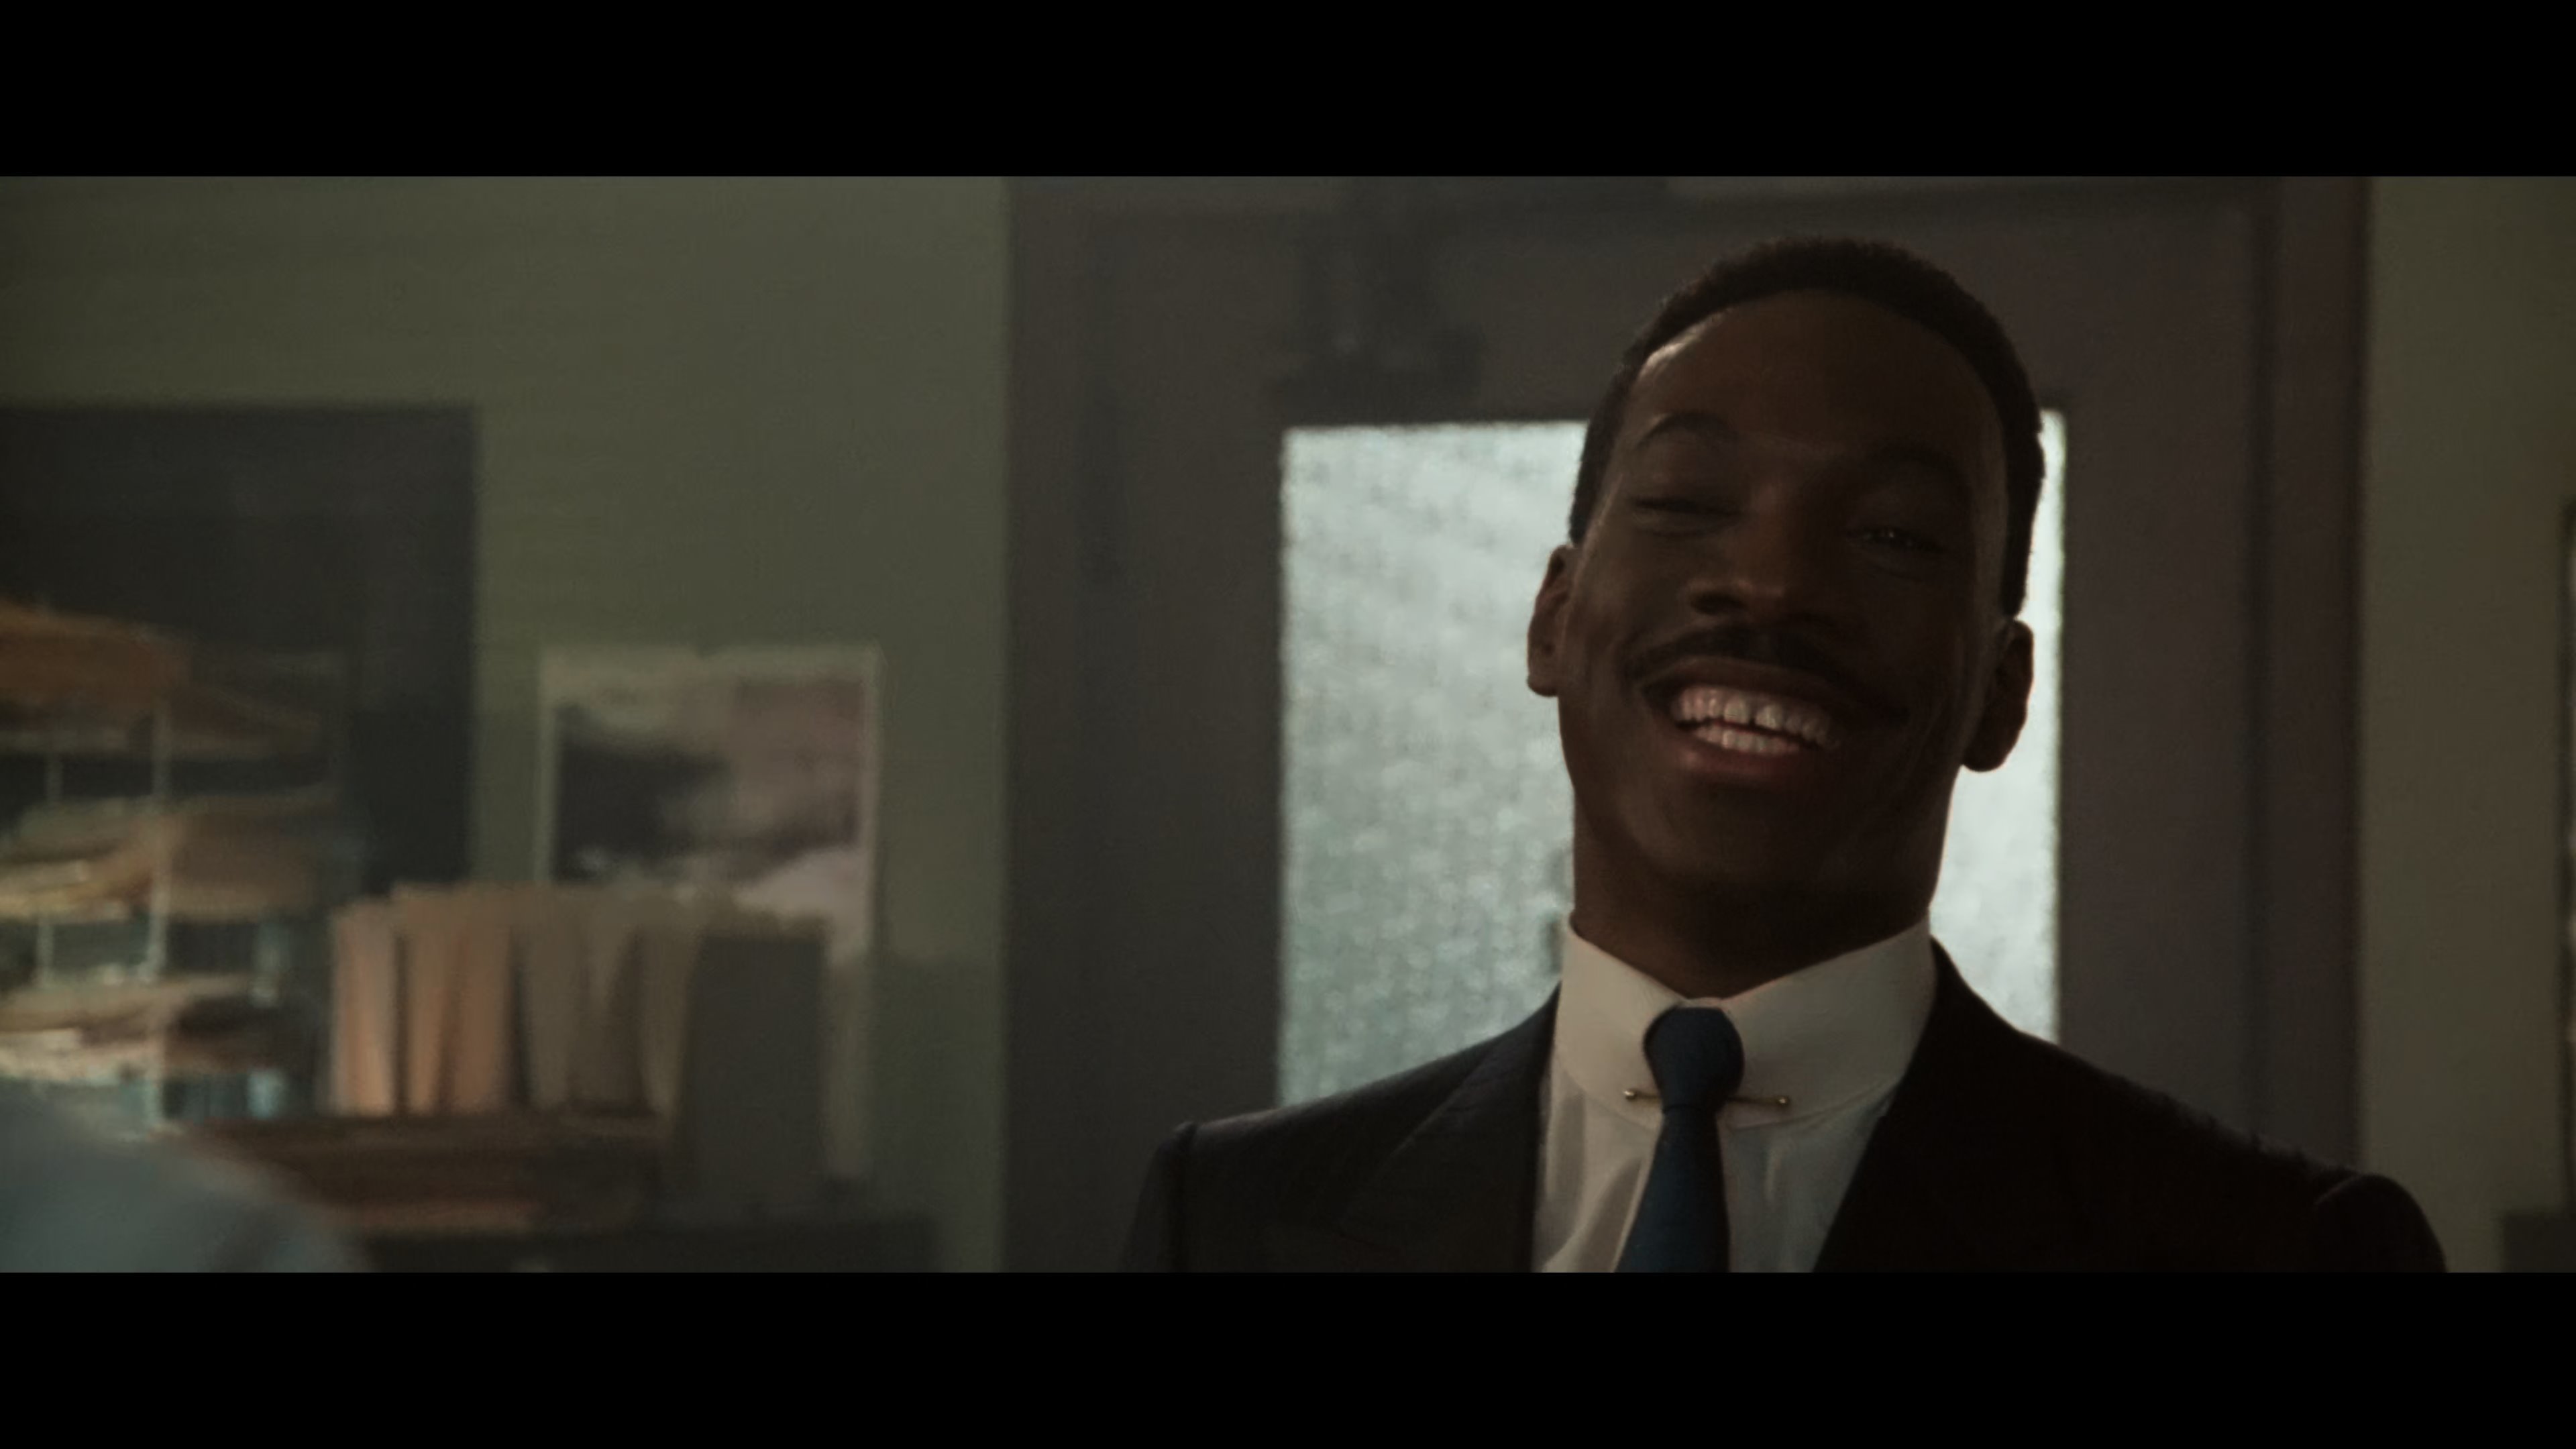 Beverly Hills Cop II 1987 2160p HDR bluray WMAN LorD